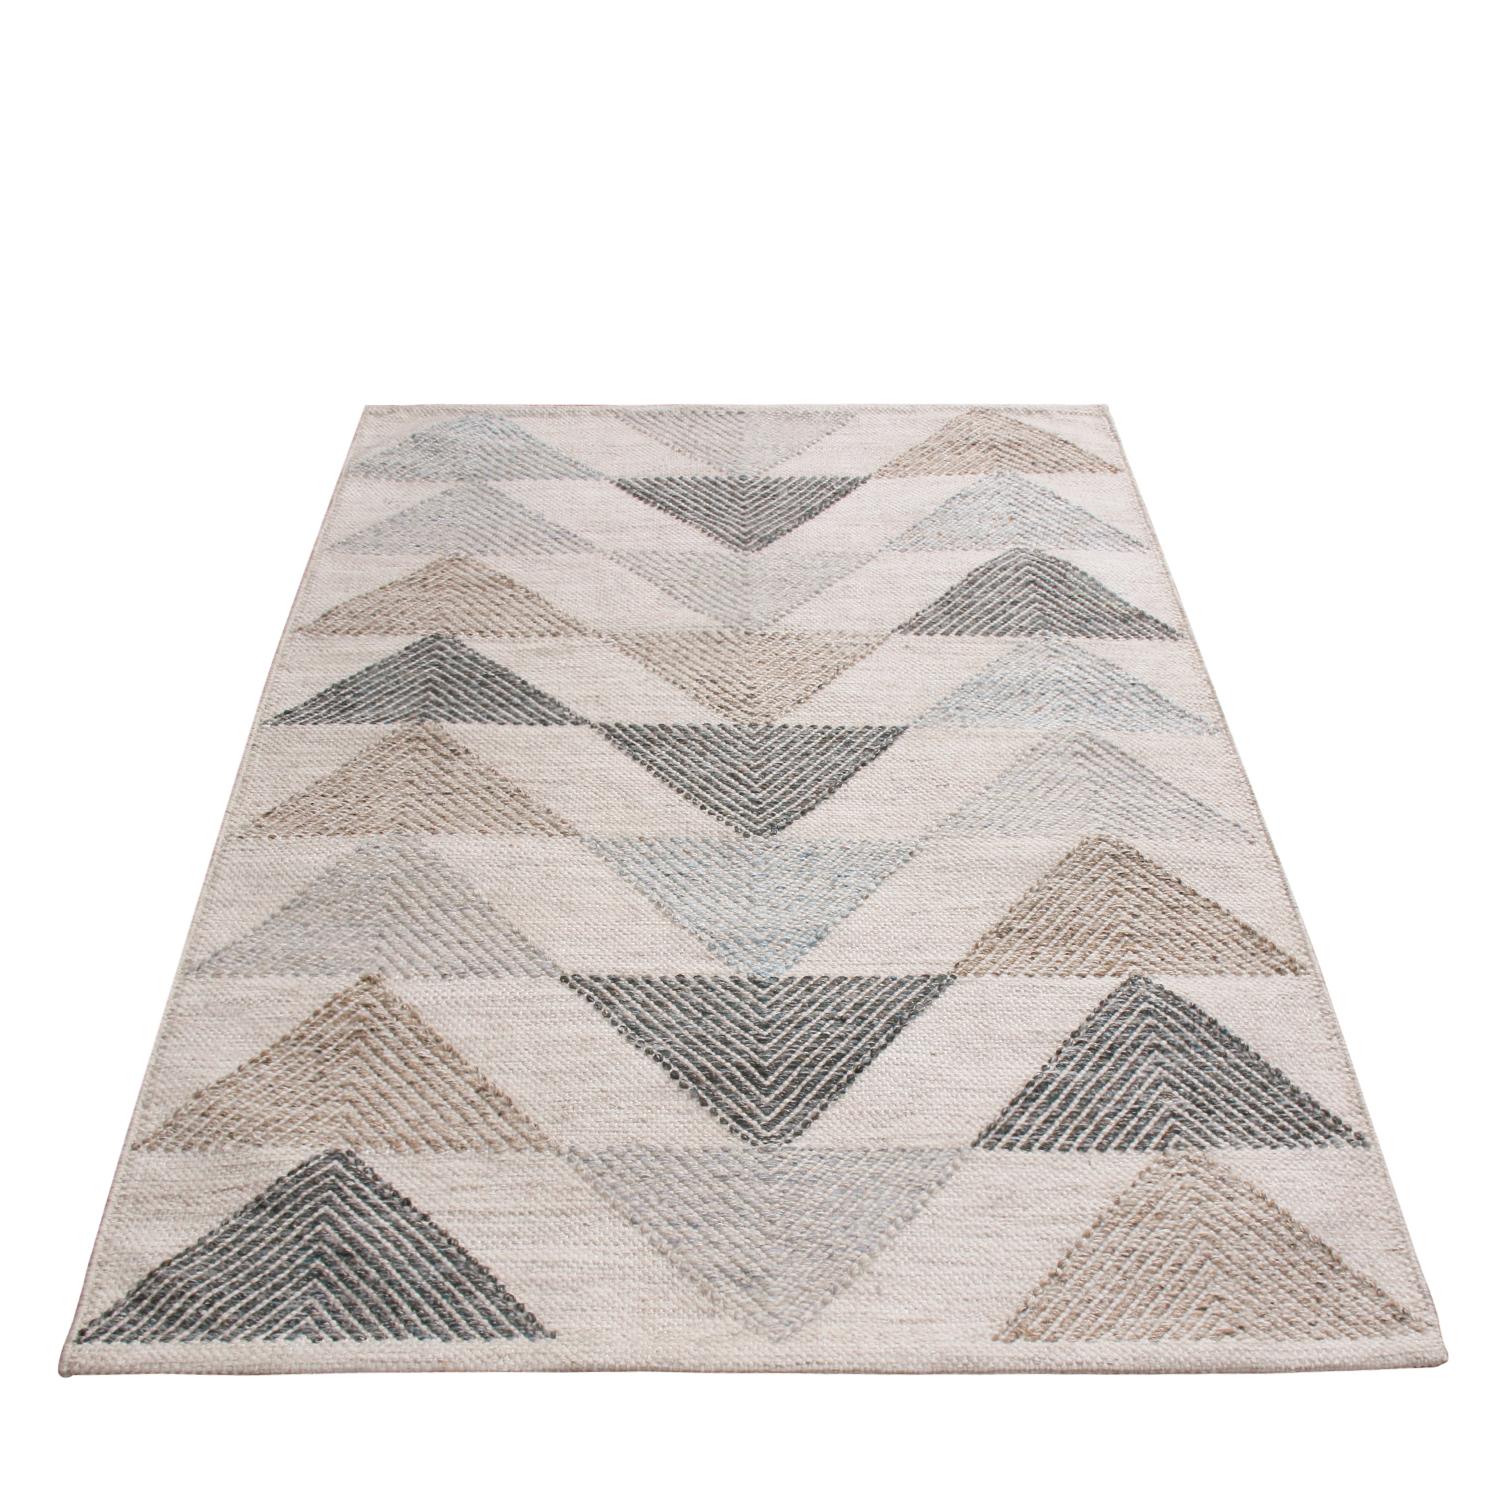 Originating from India, this natural polyester rug hails from Rug & Kilim’s Outdoor Scandinavian collection, featuring designs including this chic, rippling interpretation of celebrated Moroccan diamond patterns in earth tones and multi-tonal gray